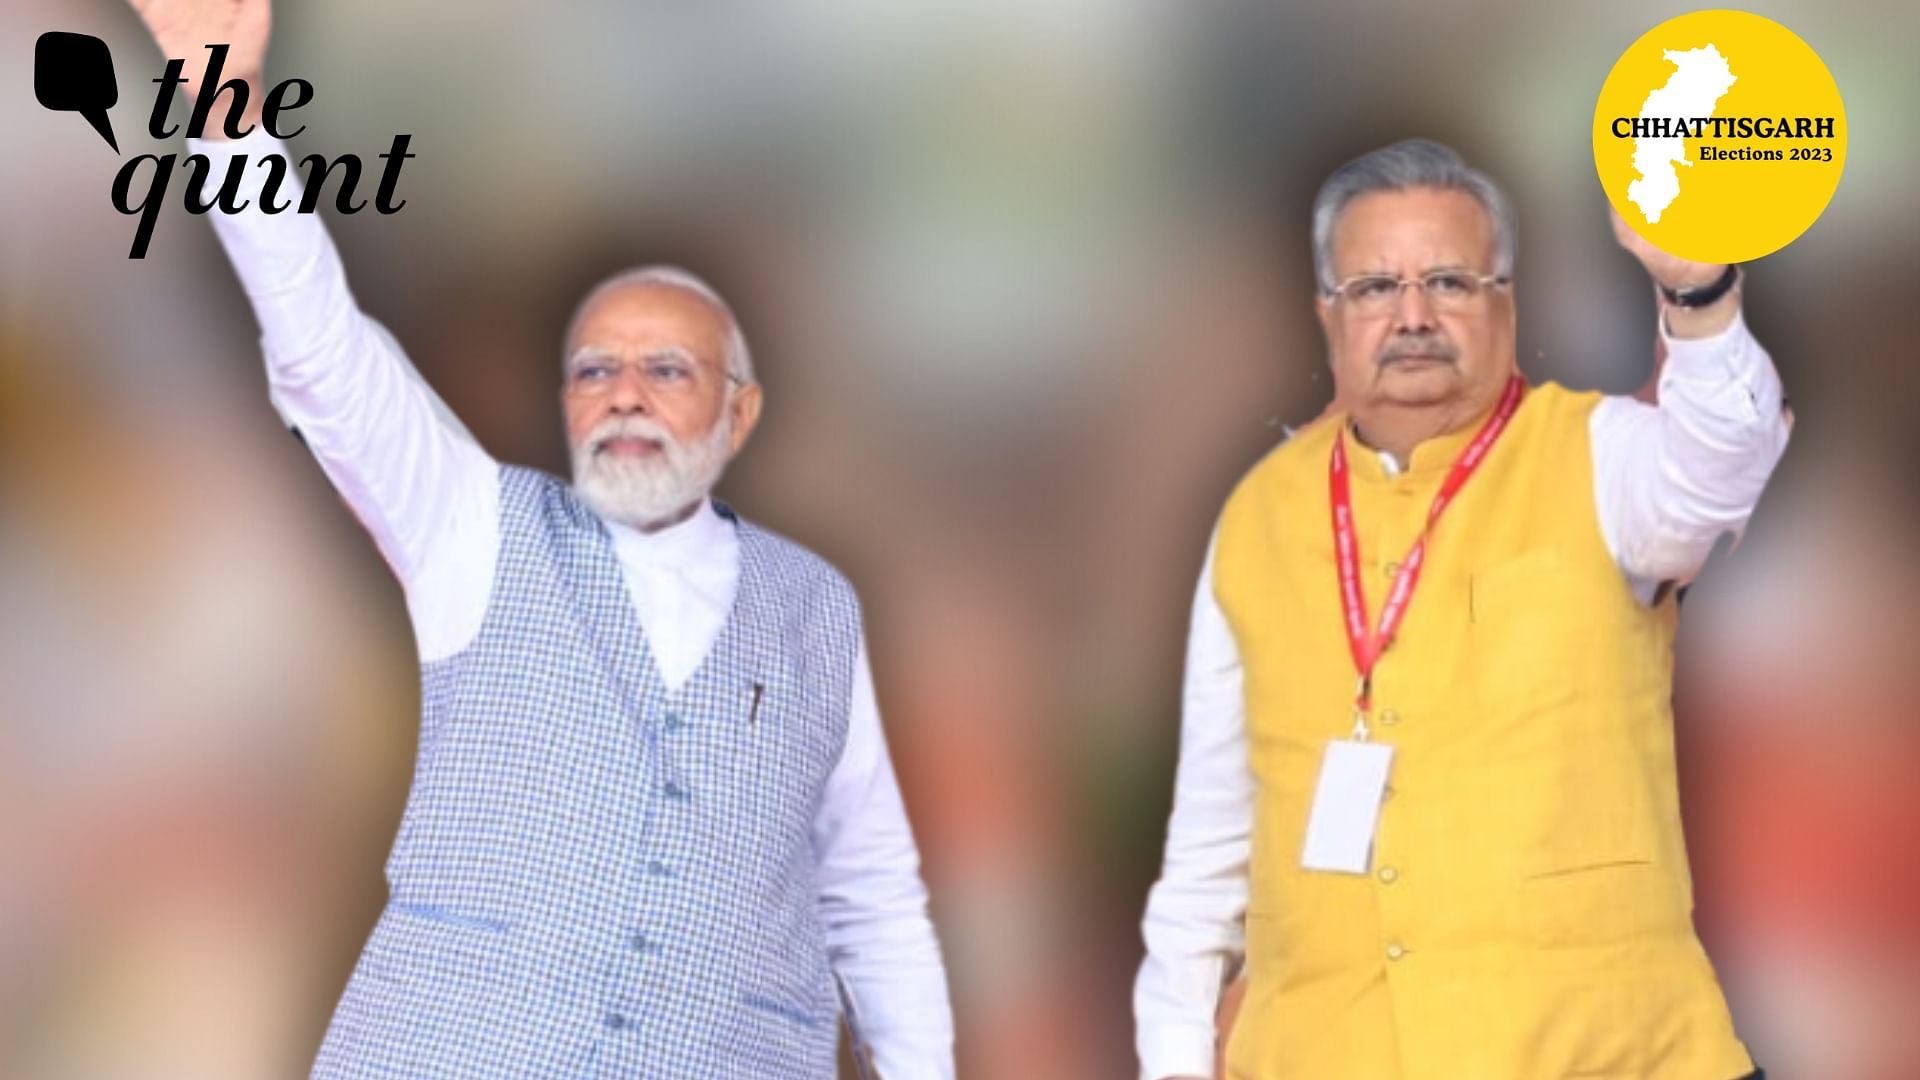 <div class="paragraphs"><p>For the incumbent Congress government under CM Bhupesh Baghel, the battle for <a href="https://www.thequint.com/elections/chhattisgarh-election/widows-of-bastar-fake-encounter-allegations-bastar-tribal-voters">Chhattisgarh assembly elections 2023</a> looked tough but not unwinnable; however, the results seem to have turned down all guesses, along with Congress' hope for a return as the <a href="https://www.thequint.com/news/india/chhattisgarh-assembly-election-bastar-conversion-issue-troubles-congress-bjp-gains">Bharatiya Janata Party</a> inches closer to a decisive victory.</p></div>